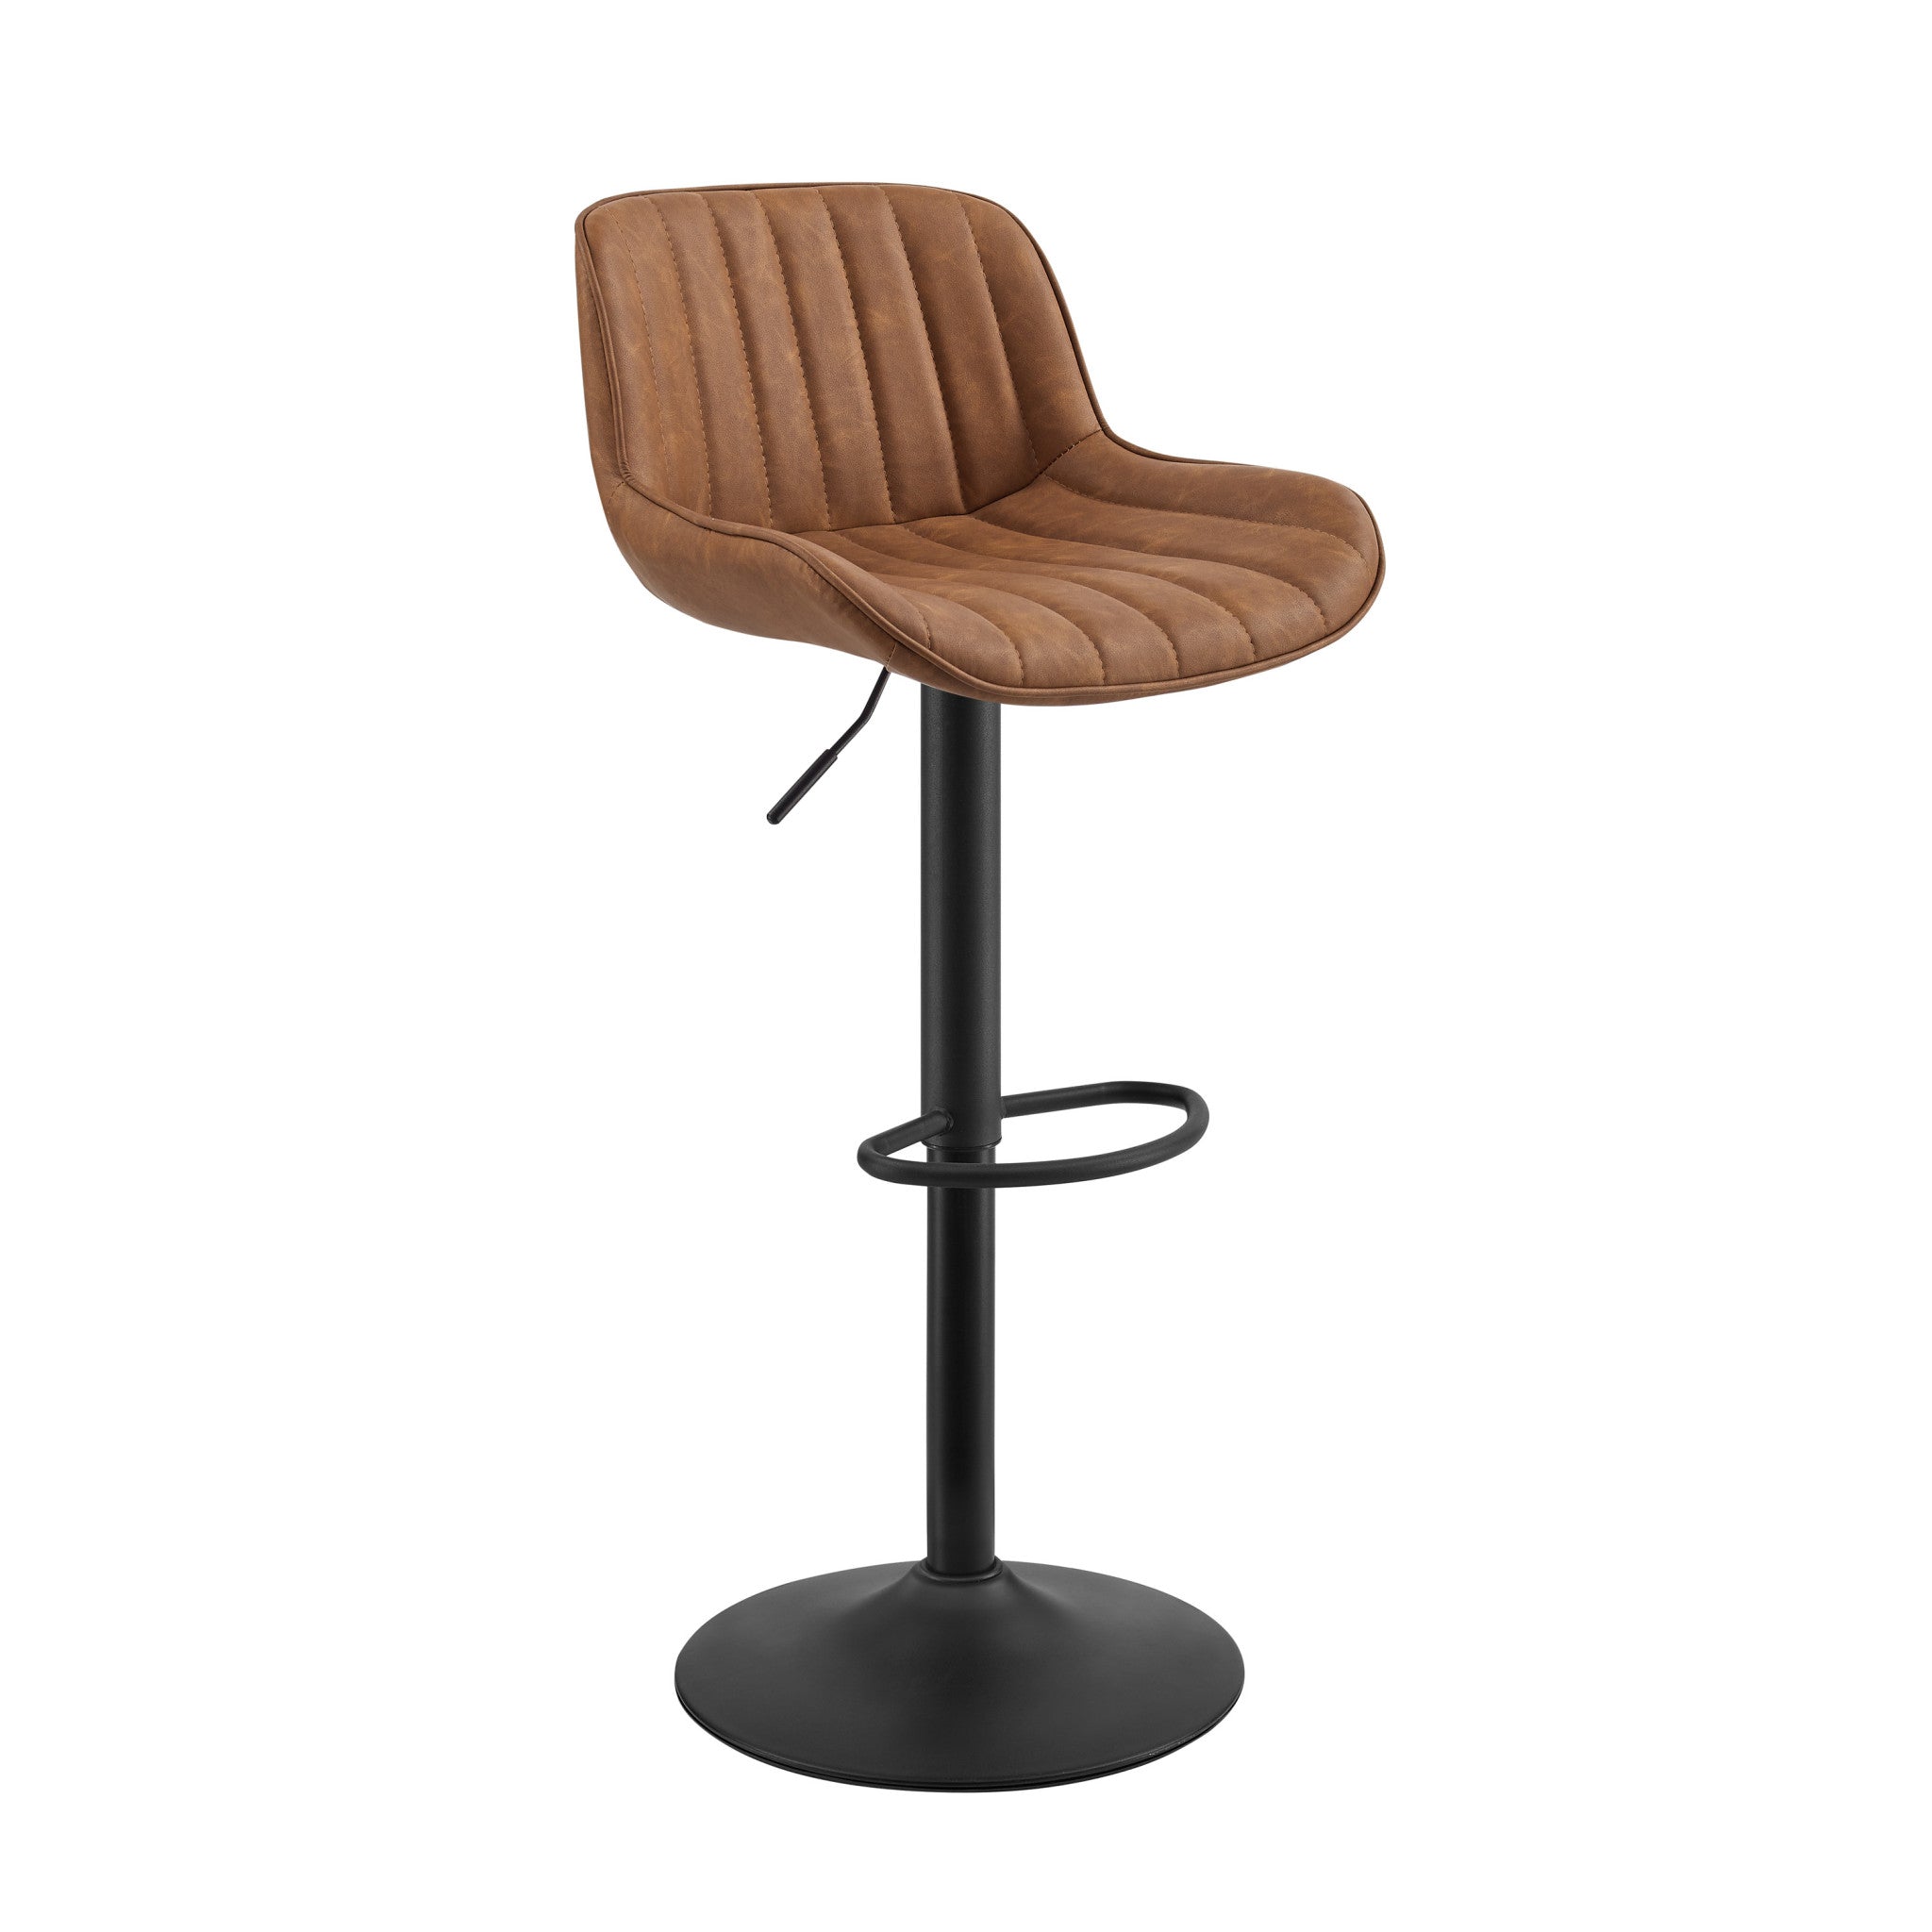 Set of Two 31" Brown And Black Faux Leather And Steel Swivel Low Back Adjustable Height Bar Chairs